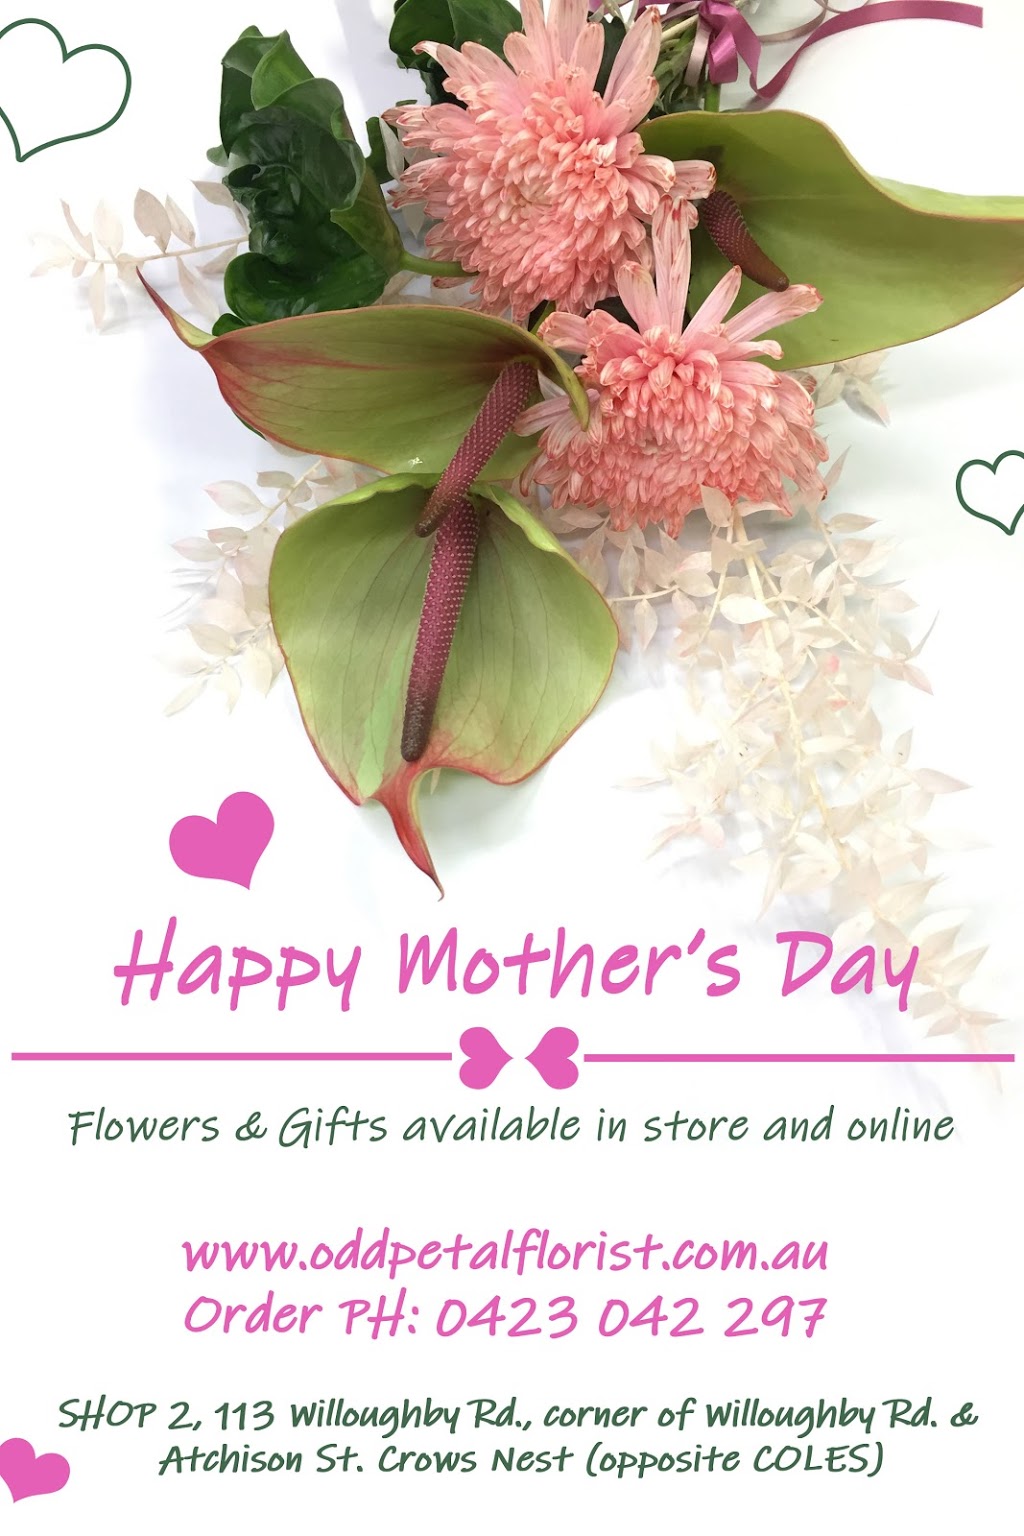 Odd Petal Florist @ Crows Nest | 113 Willoughby Rd, Crows Nest NSW 2065, Australia | Phone: 0423 042 297